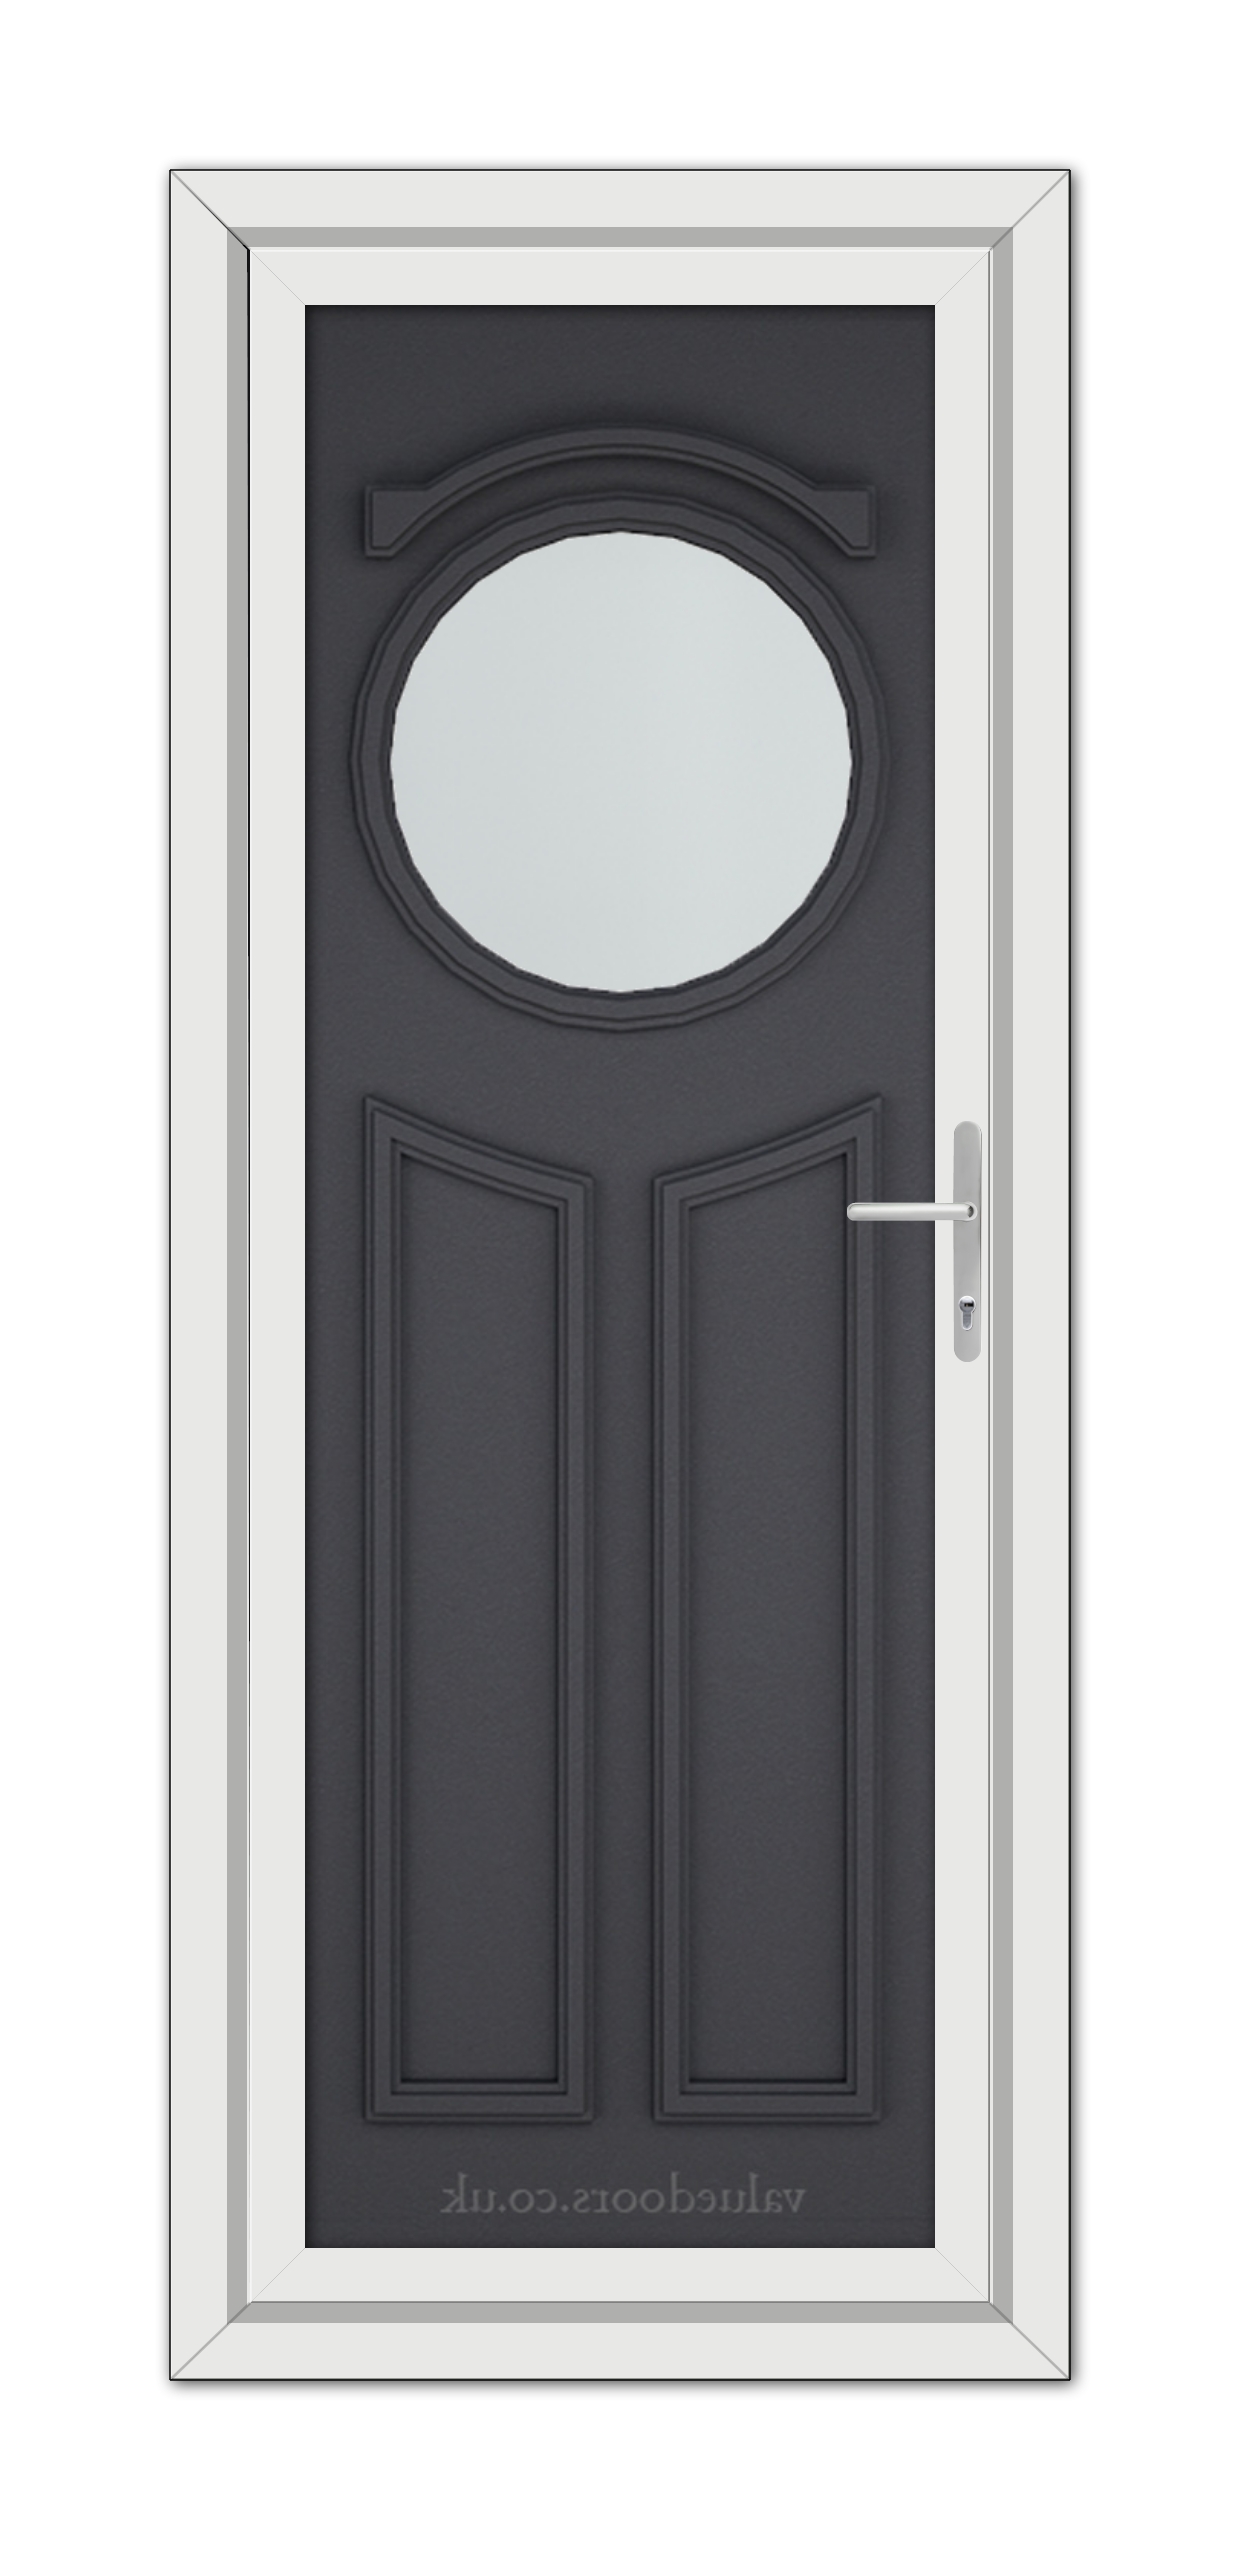 A modern Grey Grained Blenheim uPVC door with an oval glass panel and a silver handle, framed in a white door frame.